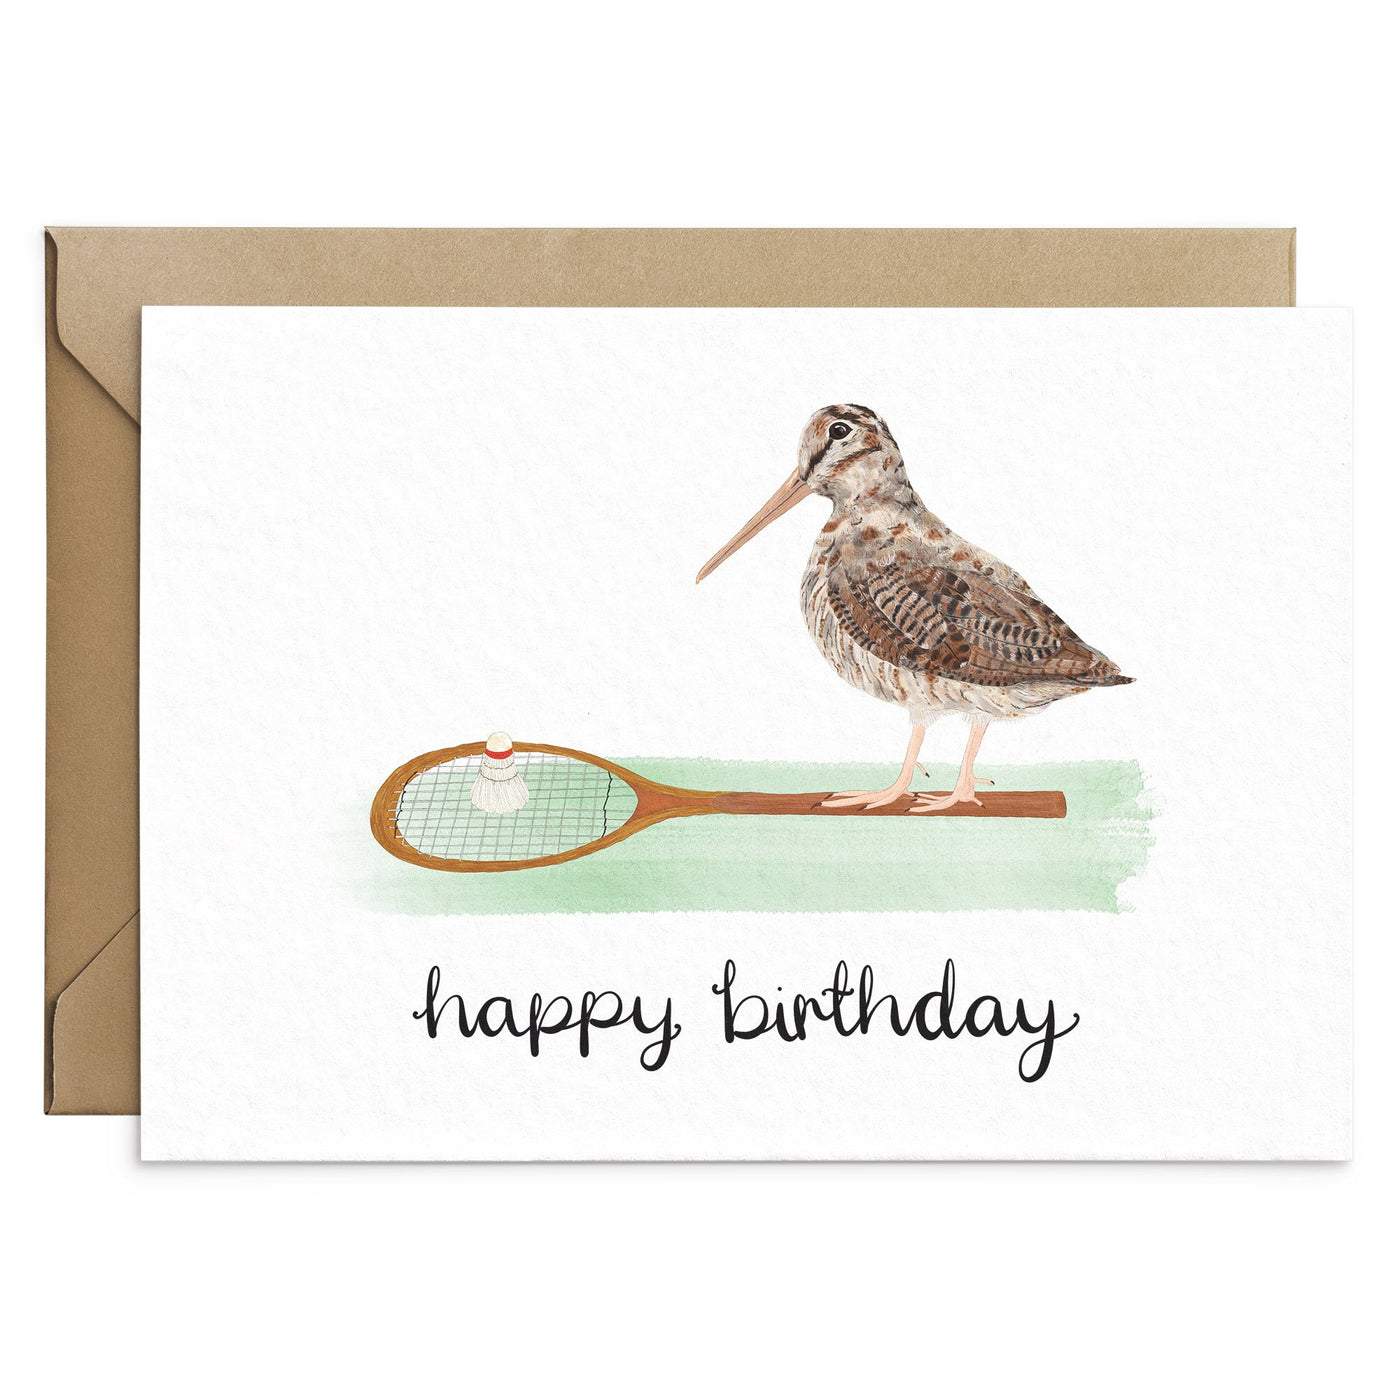 Funny Woodcock Birthday Card - Poppins & Co.